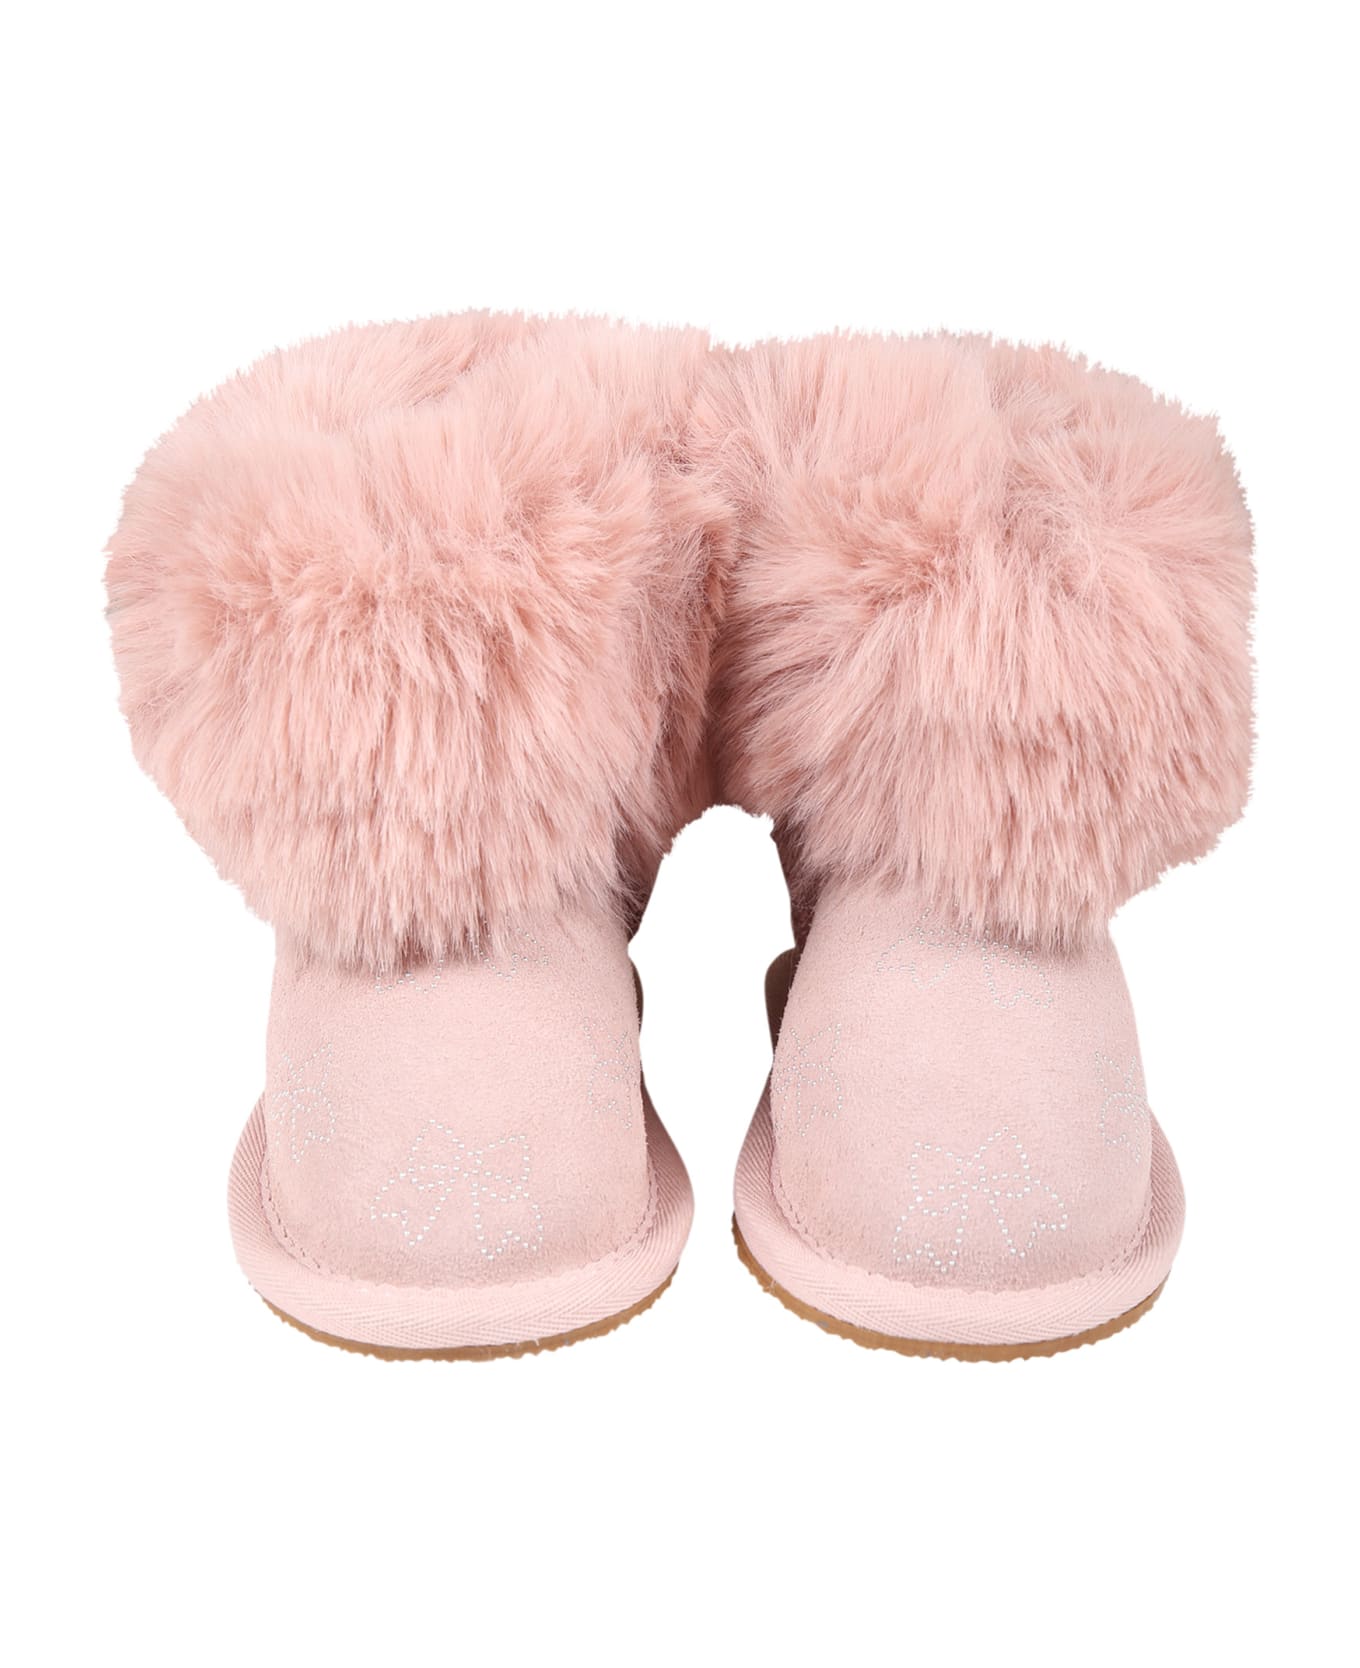 Monnalisa Pink Boots For Girl With Bows - Rosa Antico